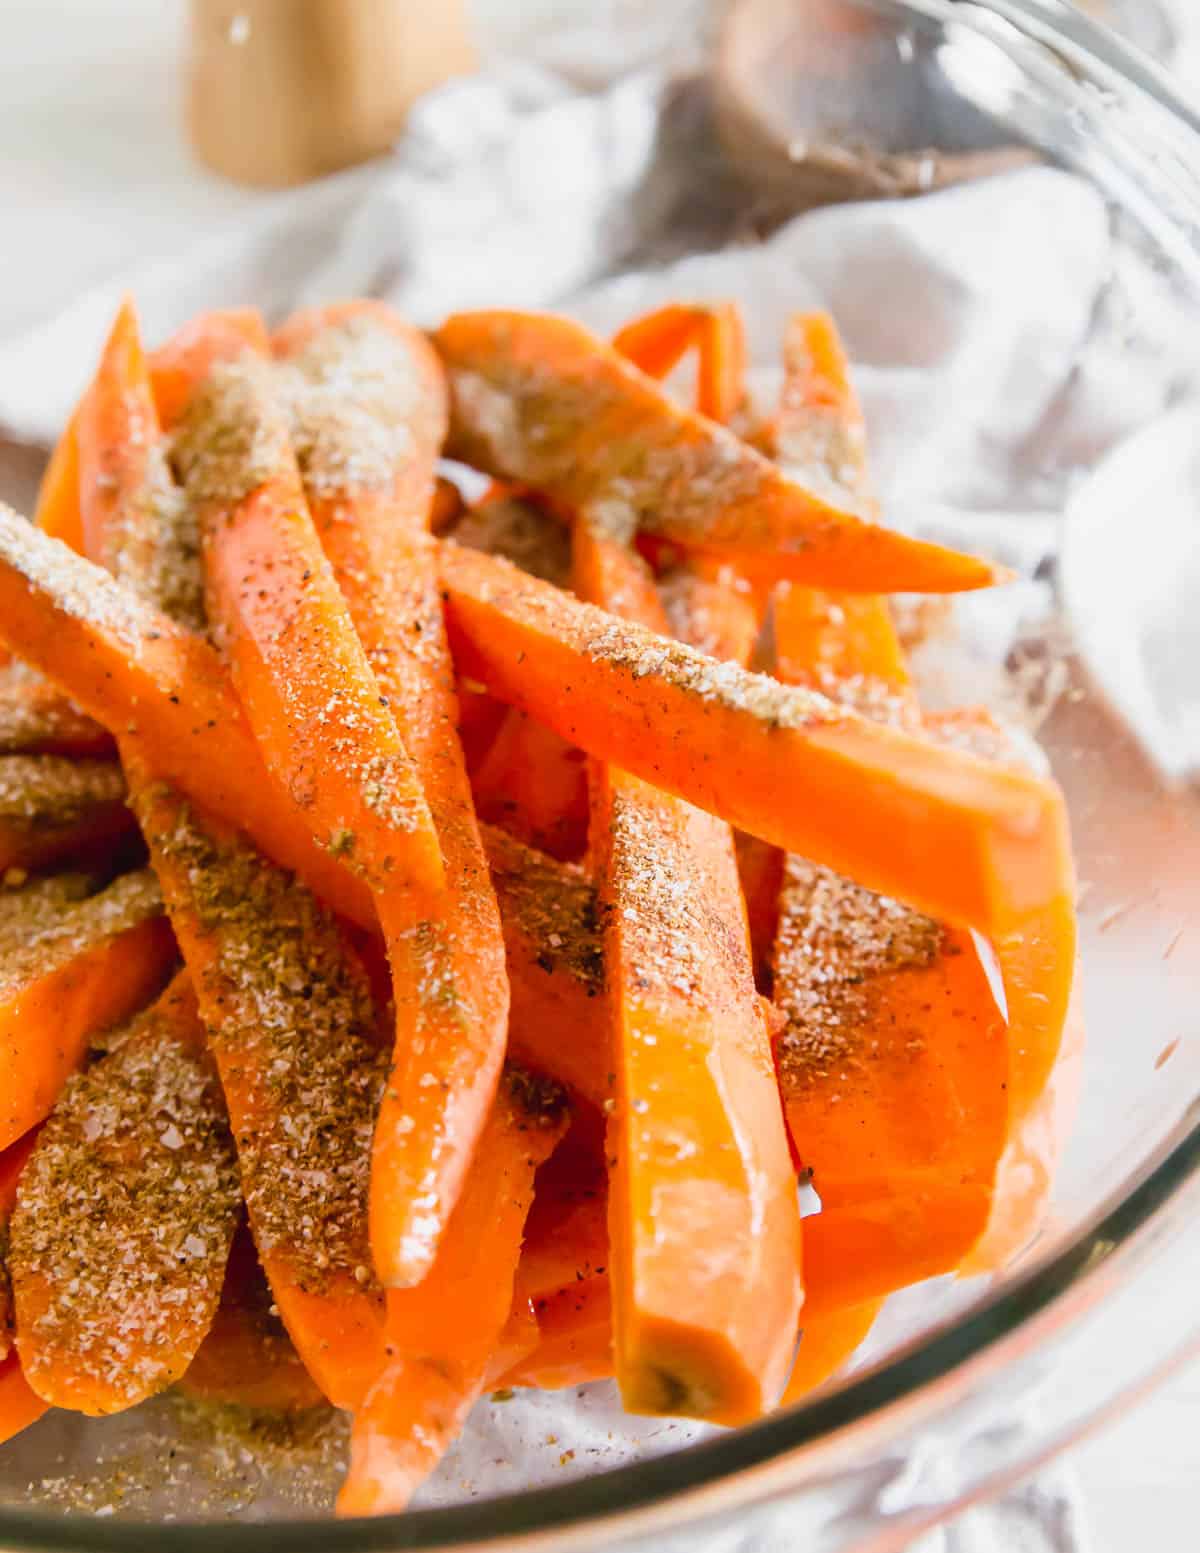 Simple spices and oil is all that's needed to make these delicious air fried carrots in 20 minutes.